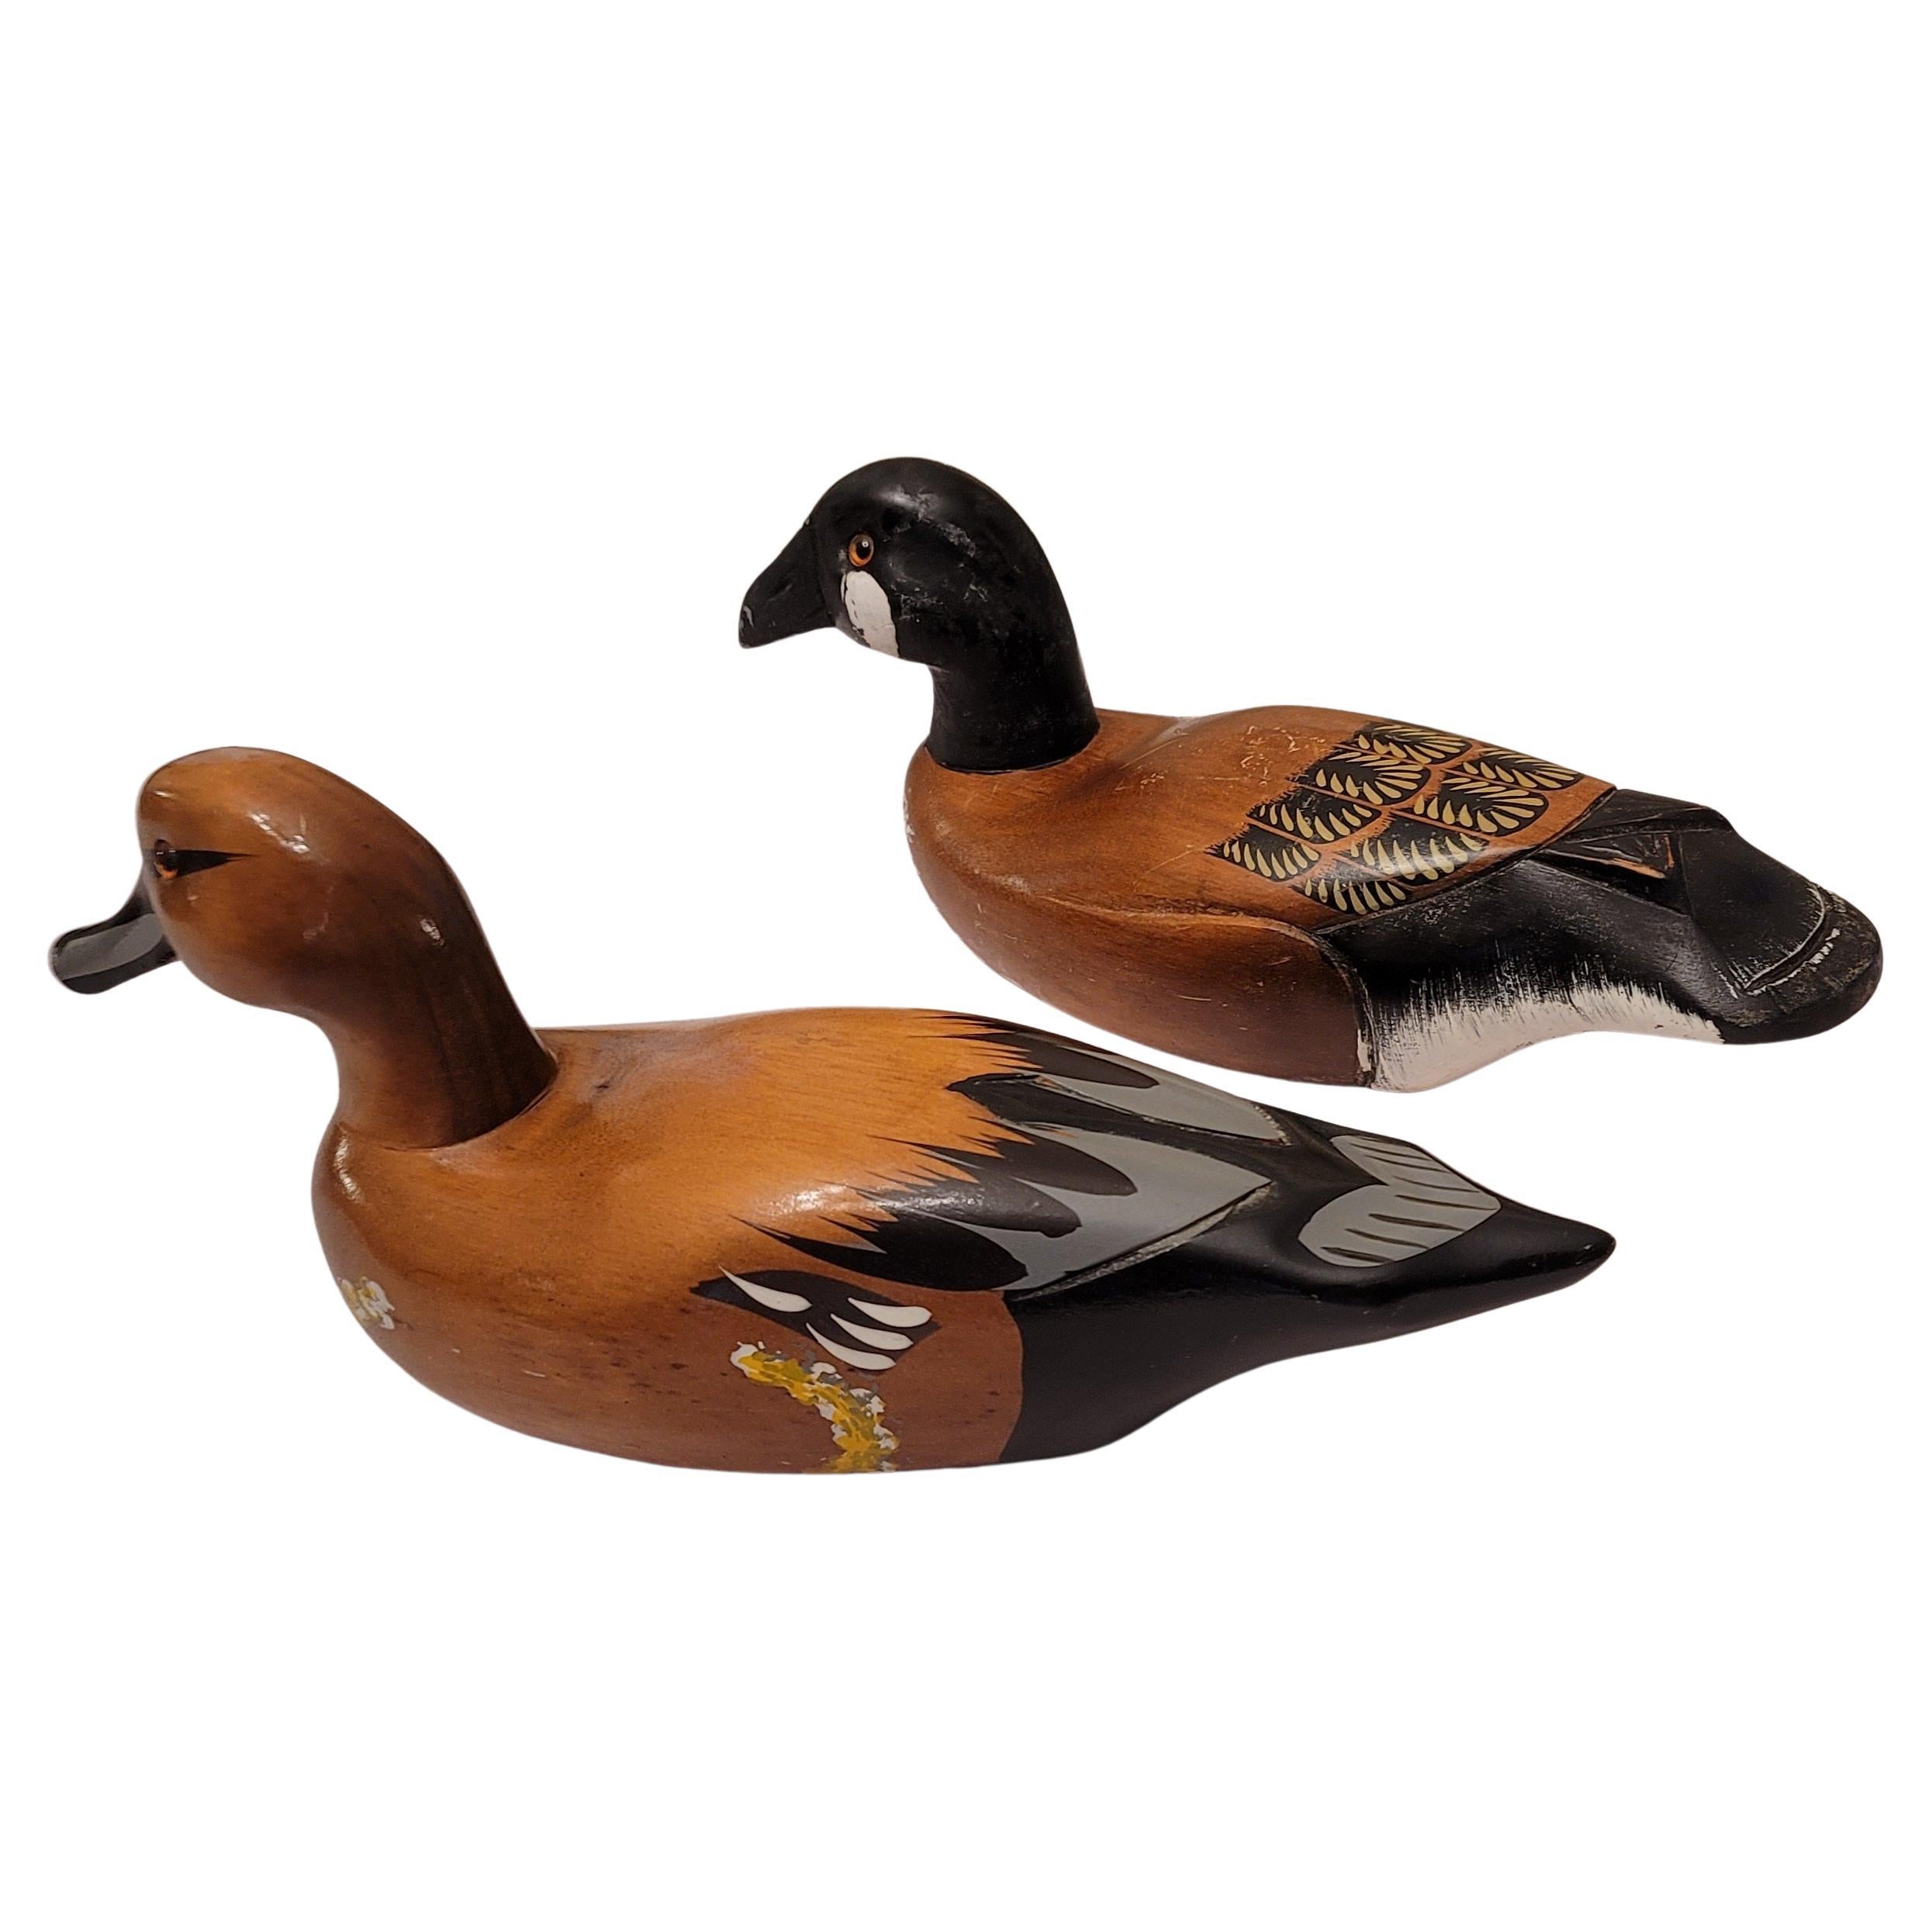 Elegant pair of Vintage American Handmade and Hand Painted Duck Decoys in good vintage condition, measuring 15